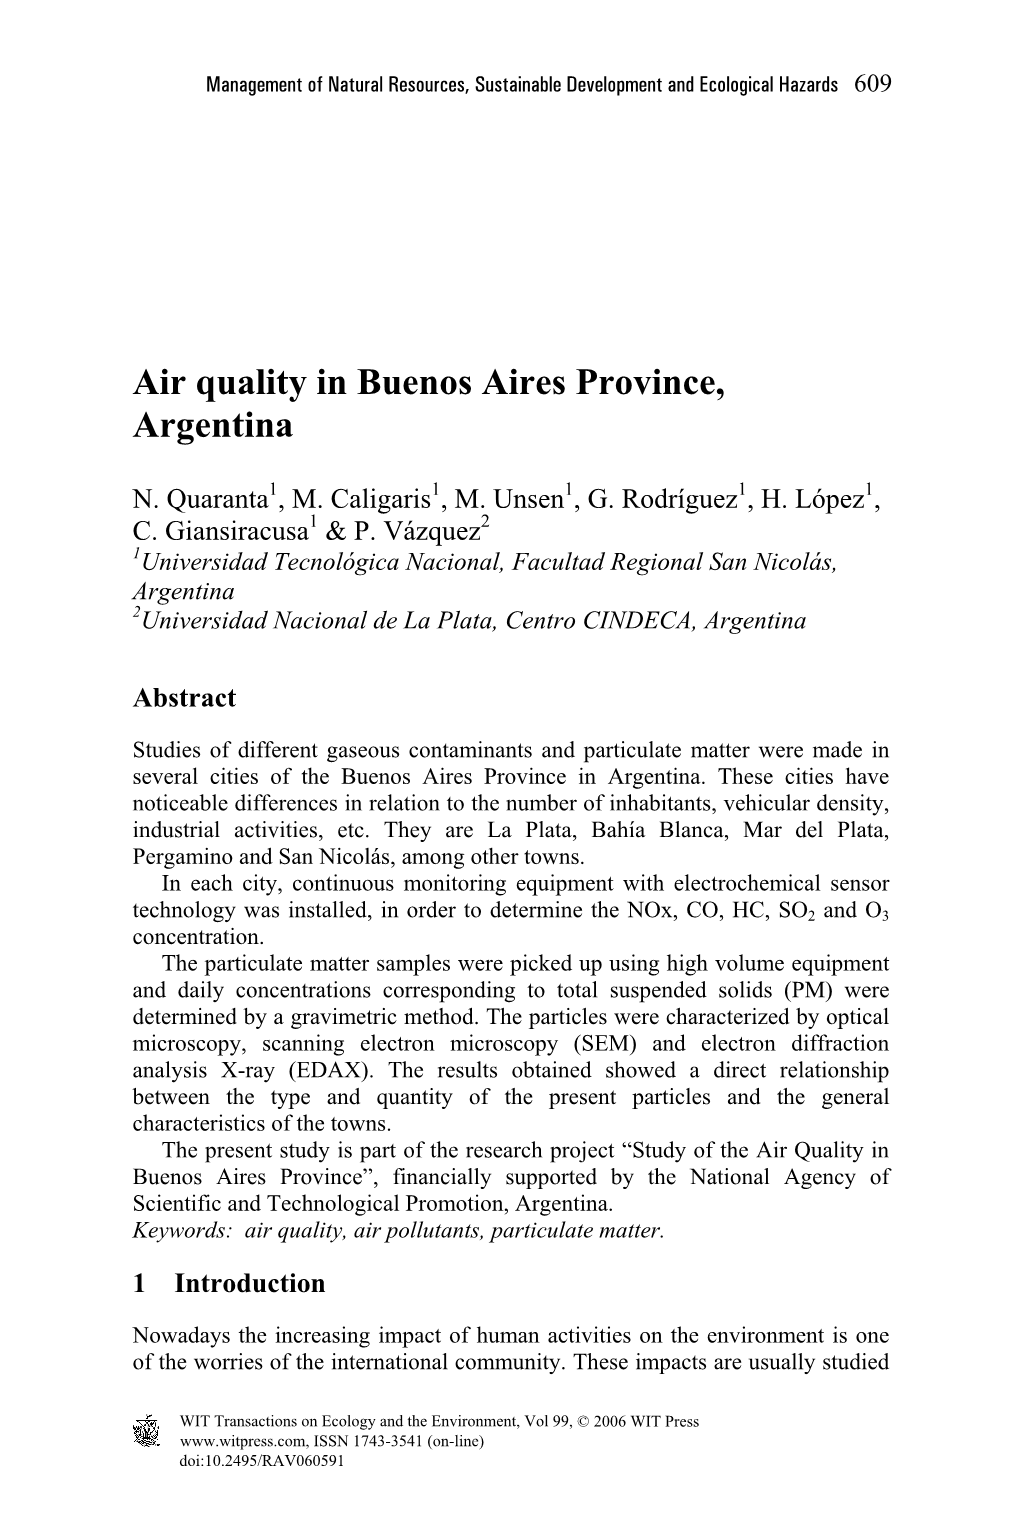 Air Quality in Buenos Aires Province, Argentina